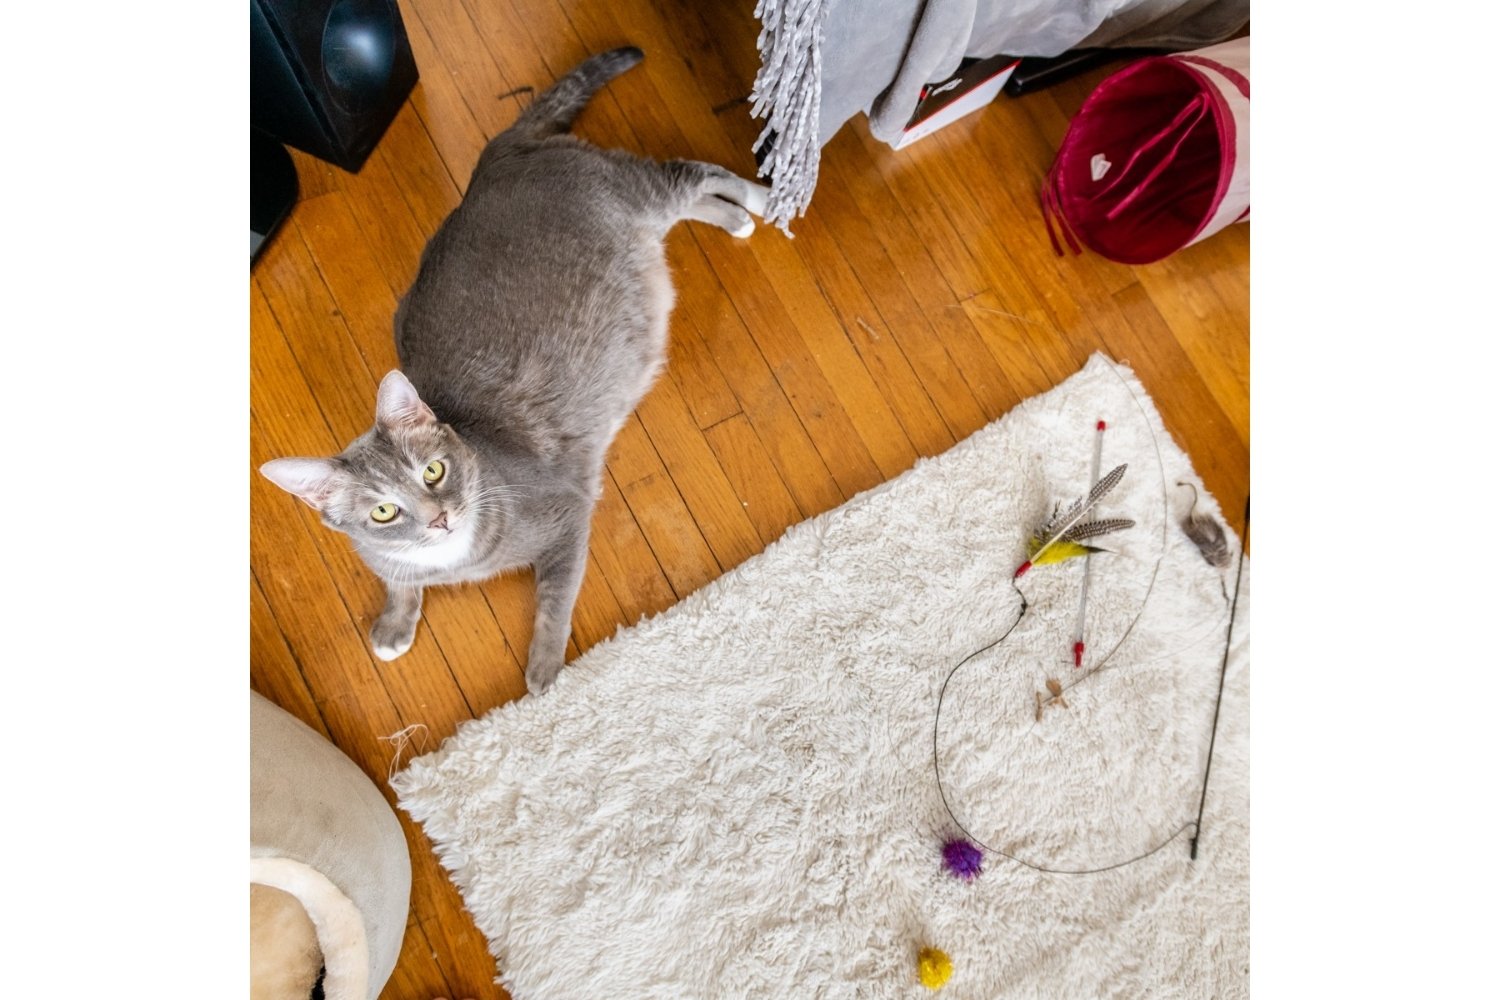 Cat with toys